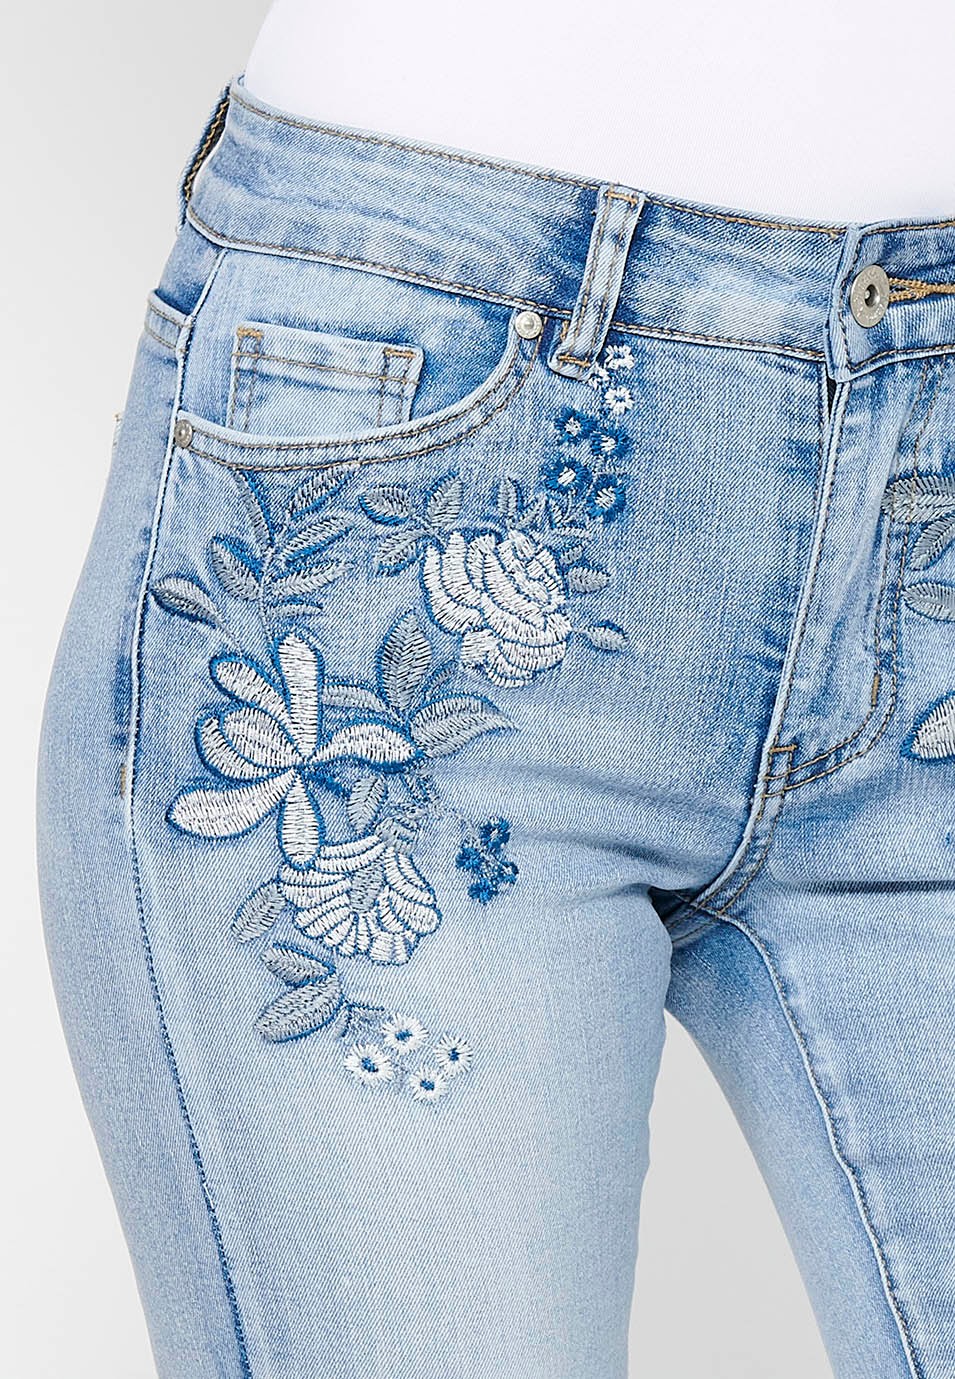 Long flared denim pants with front zipper closure and button with floral front embroidery and five pockets, one light blue pocket for women 10